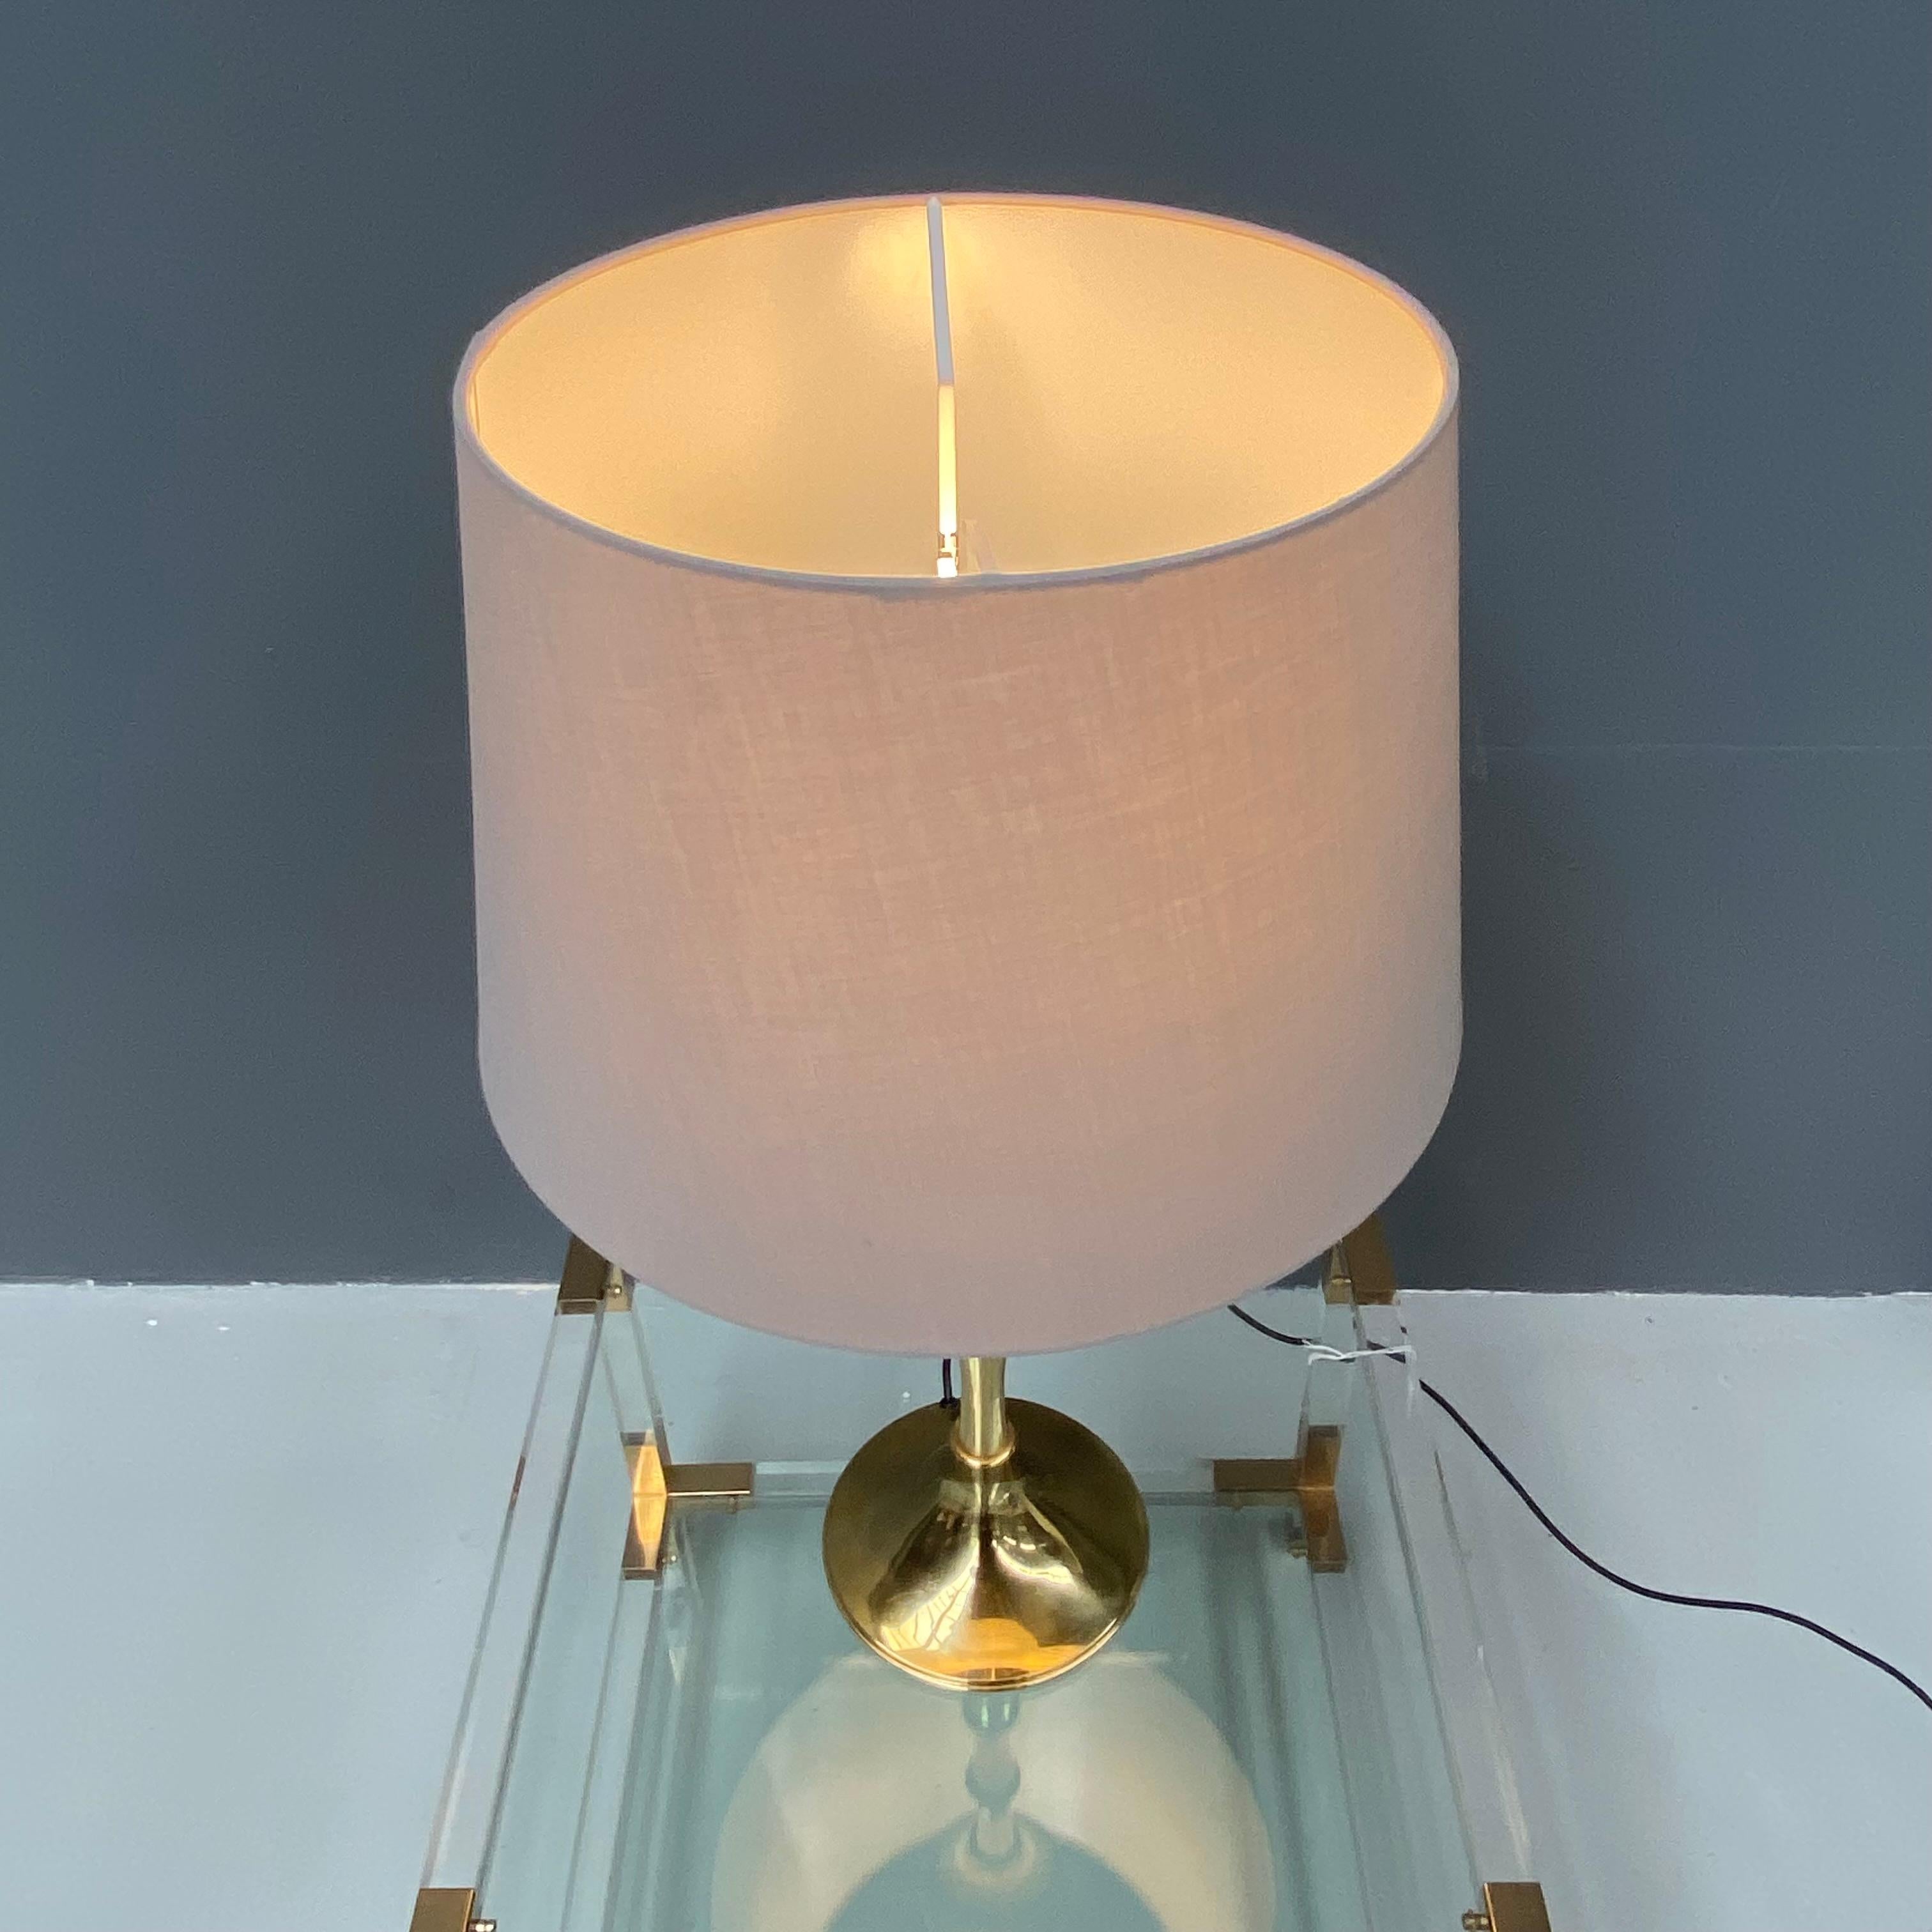 Vintage Bamboo Table Lamp in Brass by Ingo Maurer for M Design, 1960s. For Sale 1